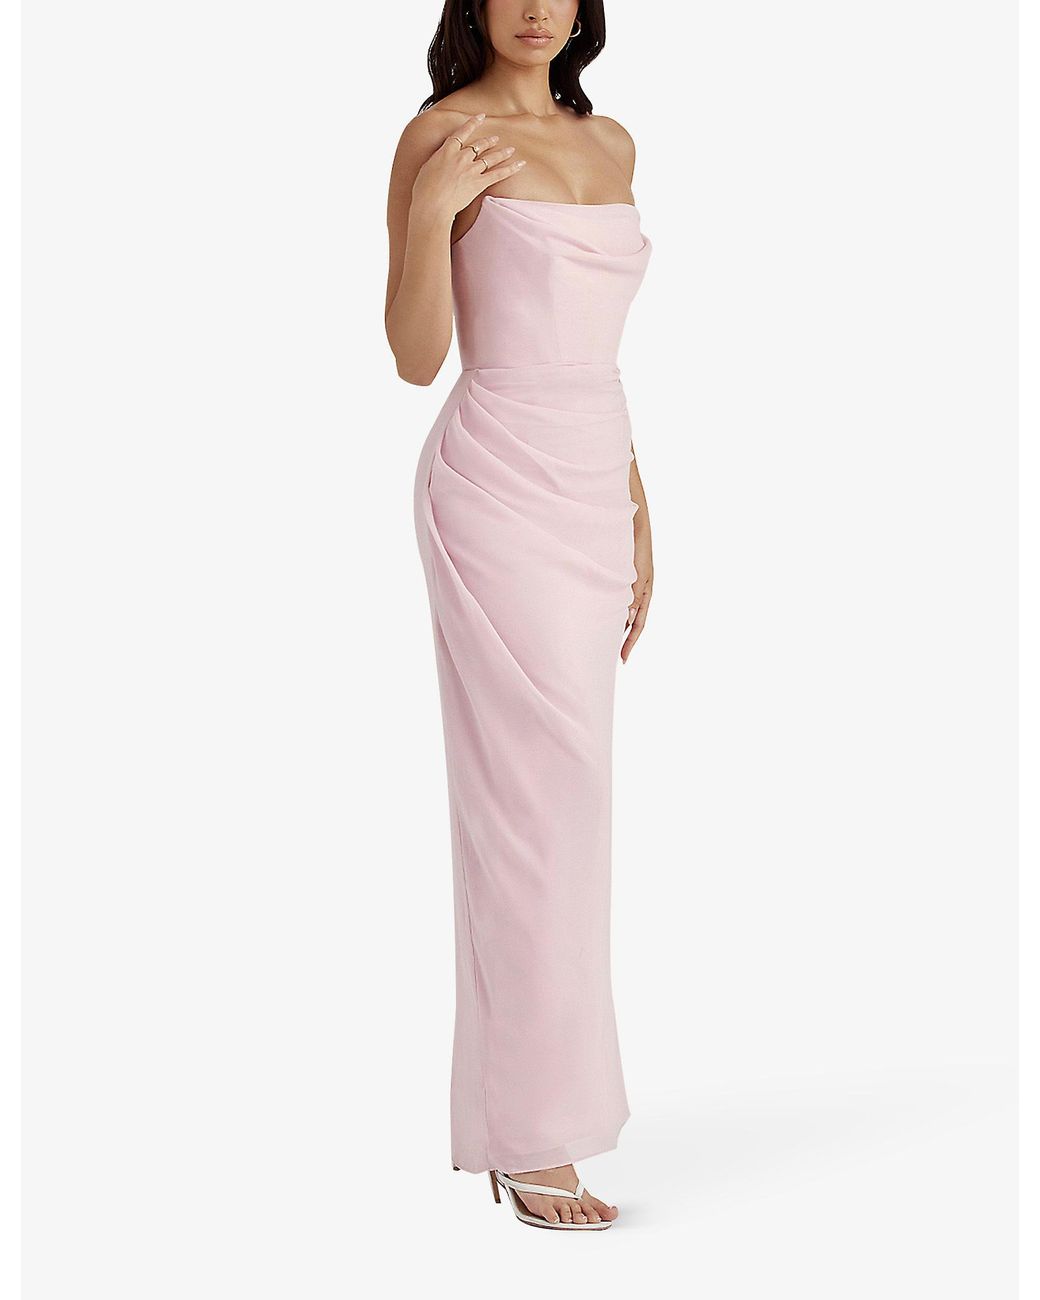 House Of Cb Adrienne Slim-fit Satin Maxi Dress in Pink | Lyst